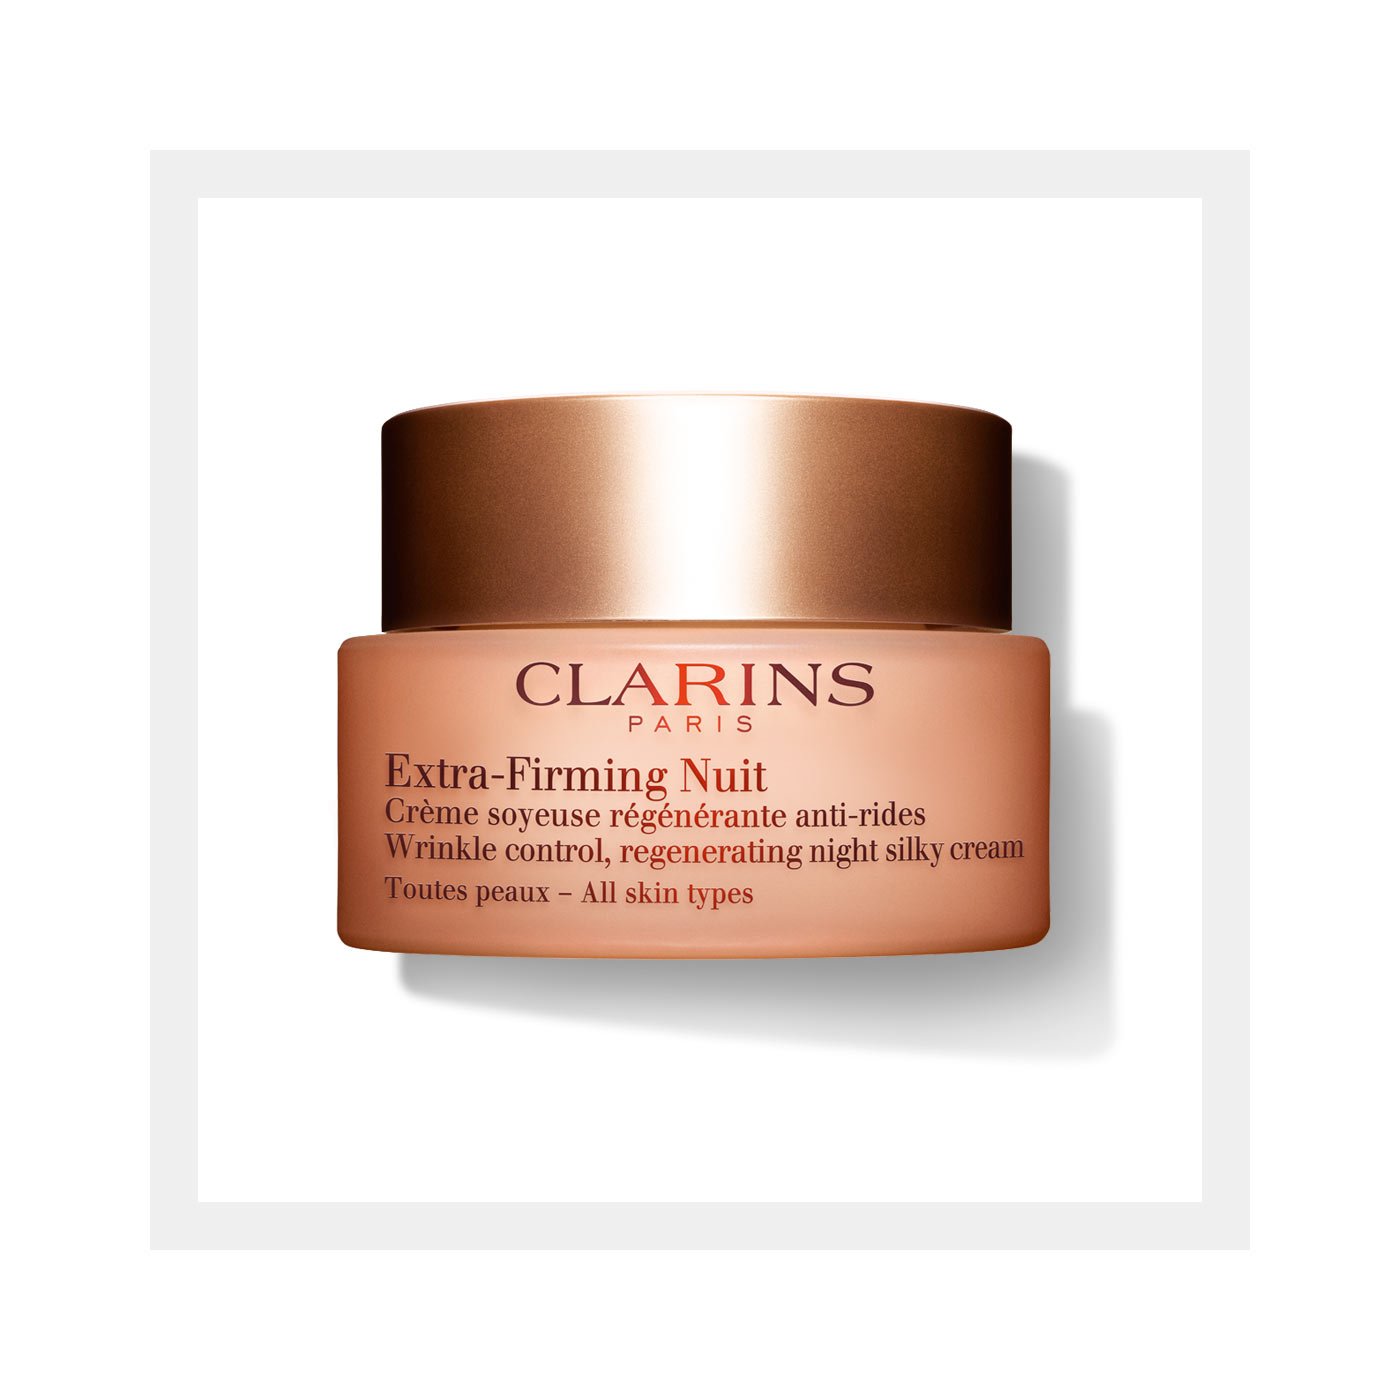 Extra-Firming Night - All skin types - Clarins